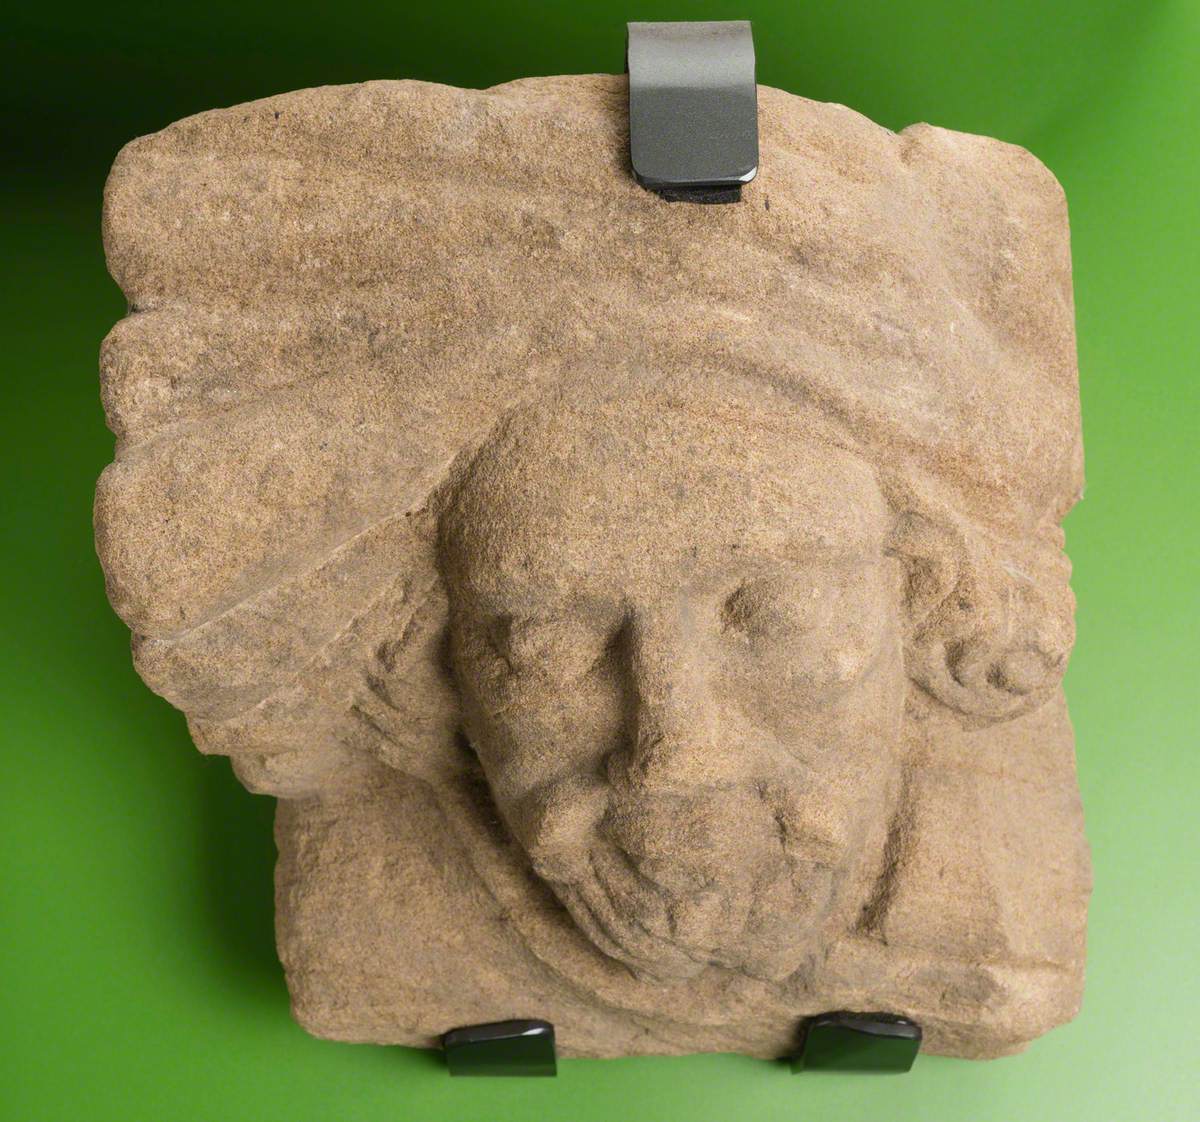 Sandstone Corbel with Realistic Male Human Head Wearing Hat or Turban: Monk Bretton Priory